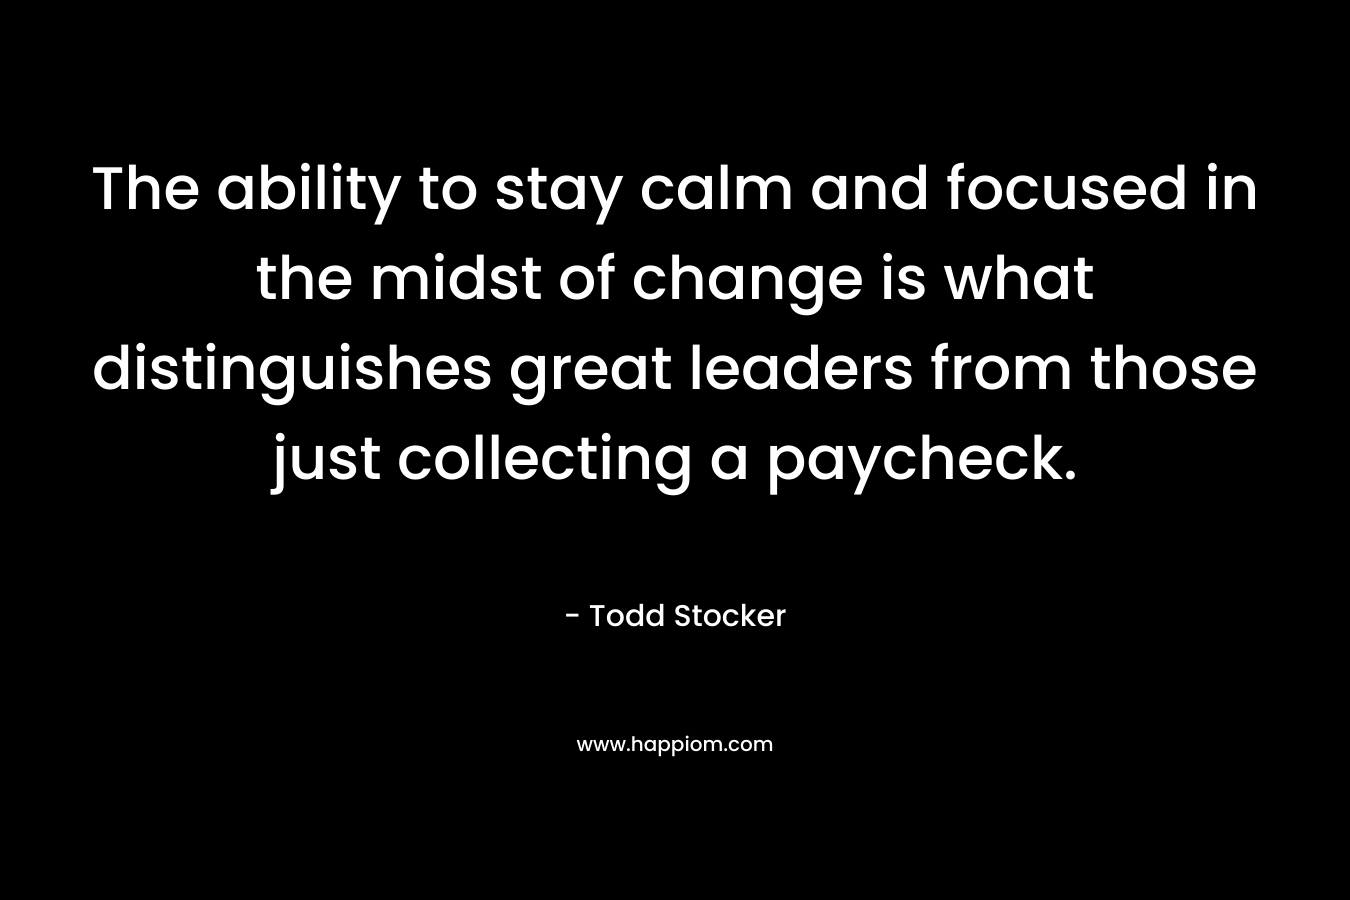 The ability to stay calm and focused in the midst of change is what distinguishes great leaders from those just collecting a paycheck. – Todd Stocker